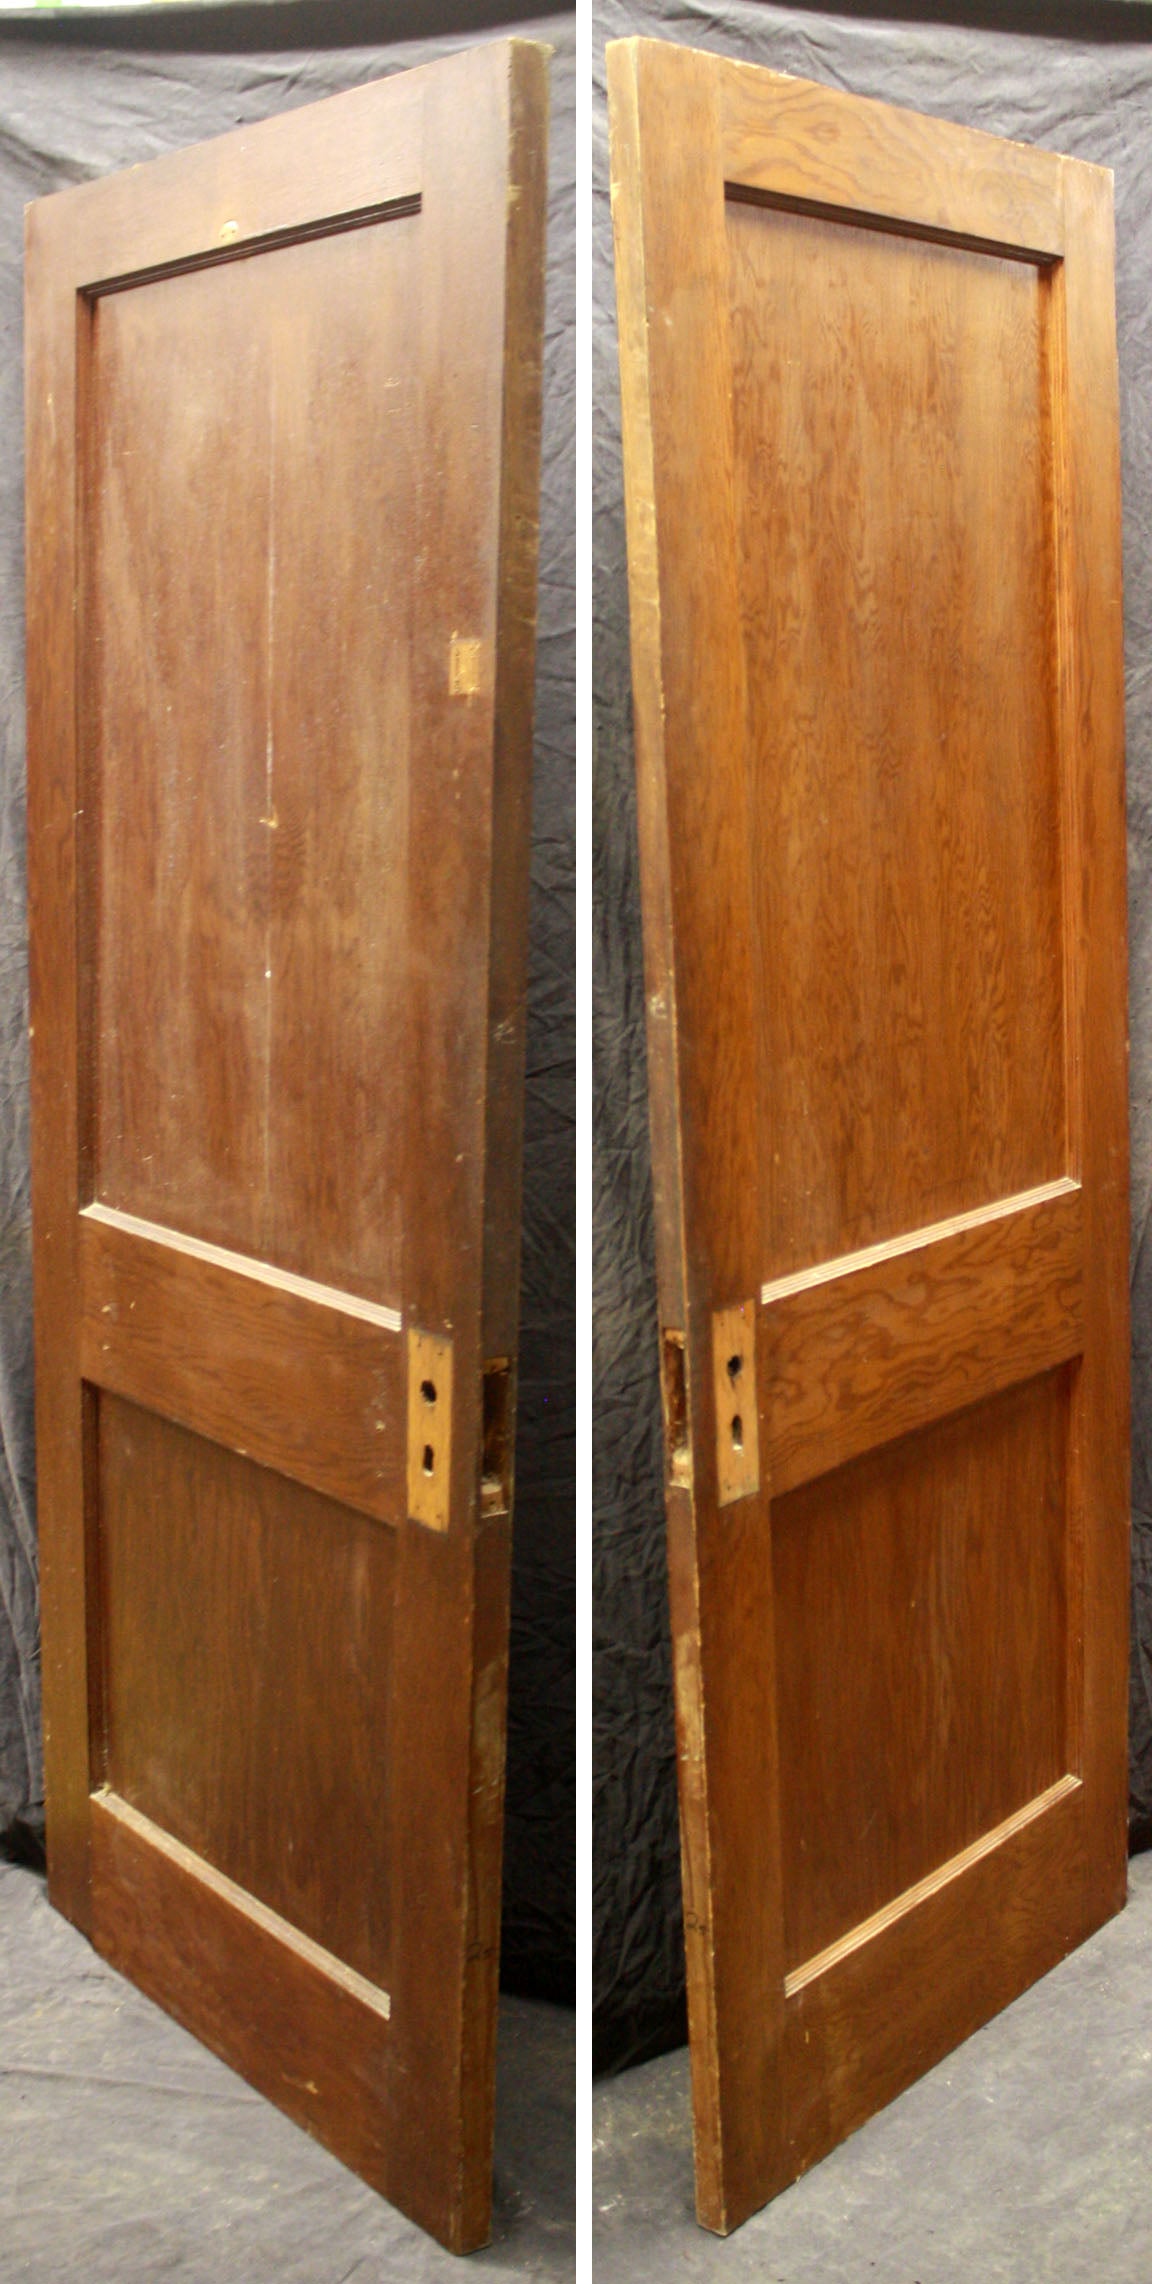 5 available 30"x78" Antique Vintage Old Reclaimed Salvaged Interior Wood Wooden Doors 2 Panels